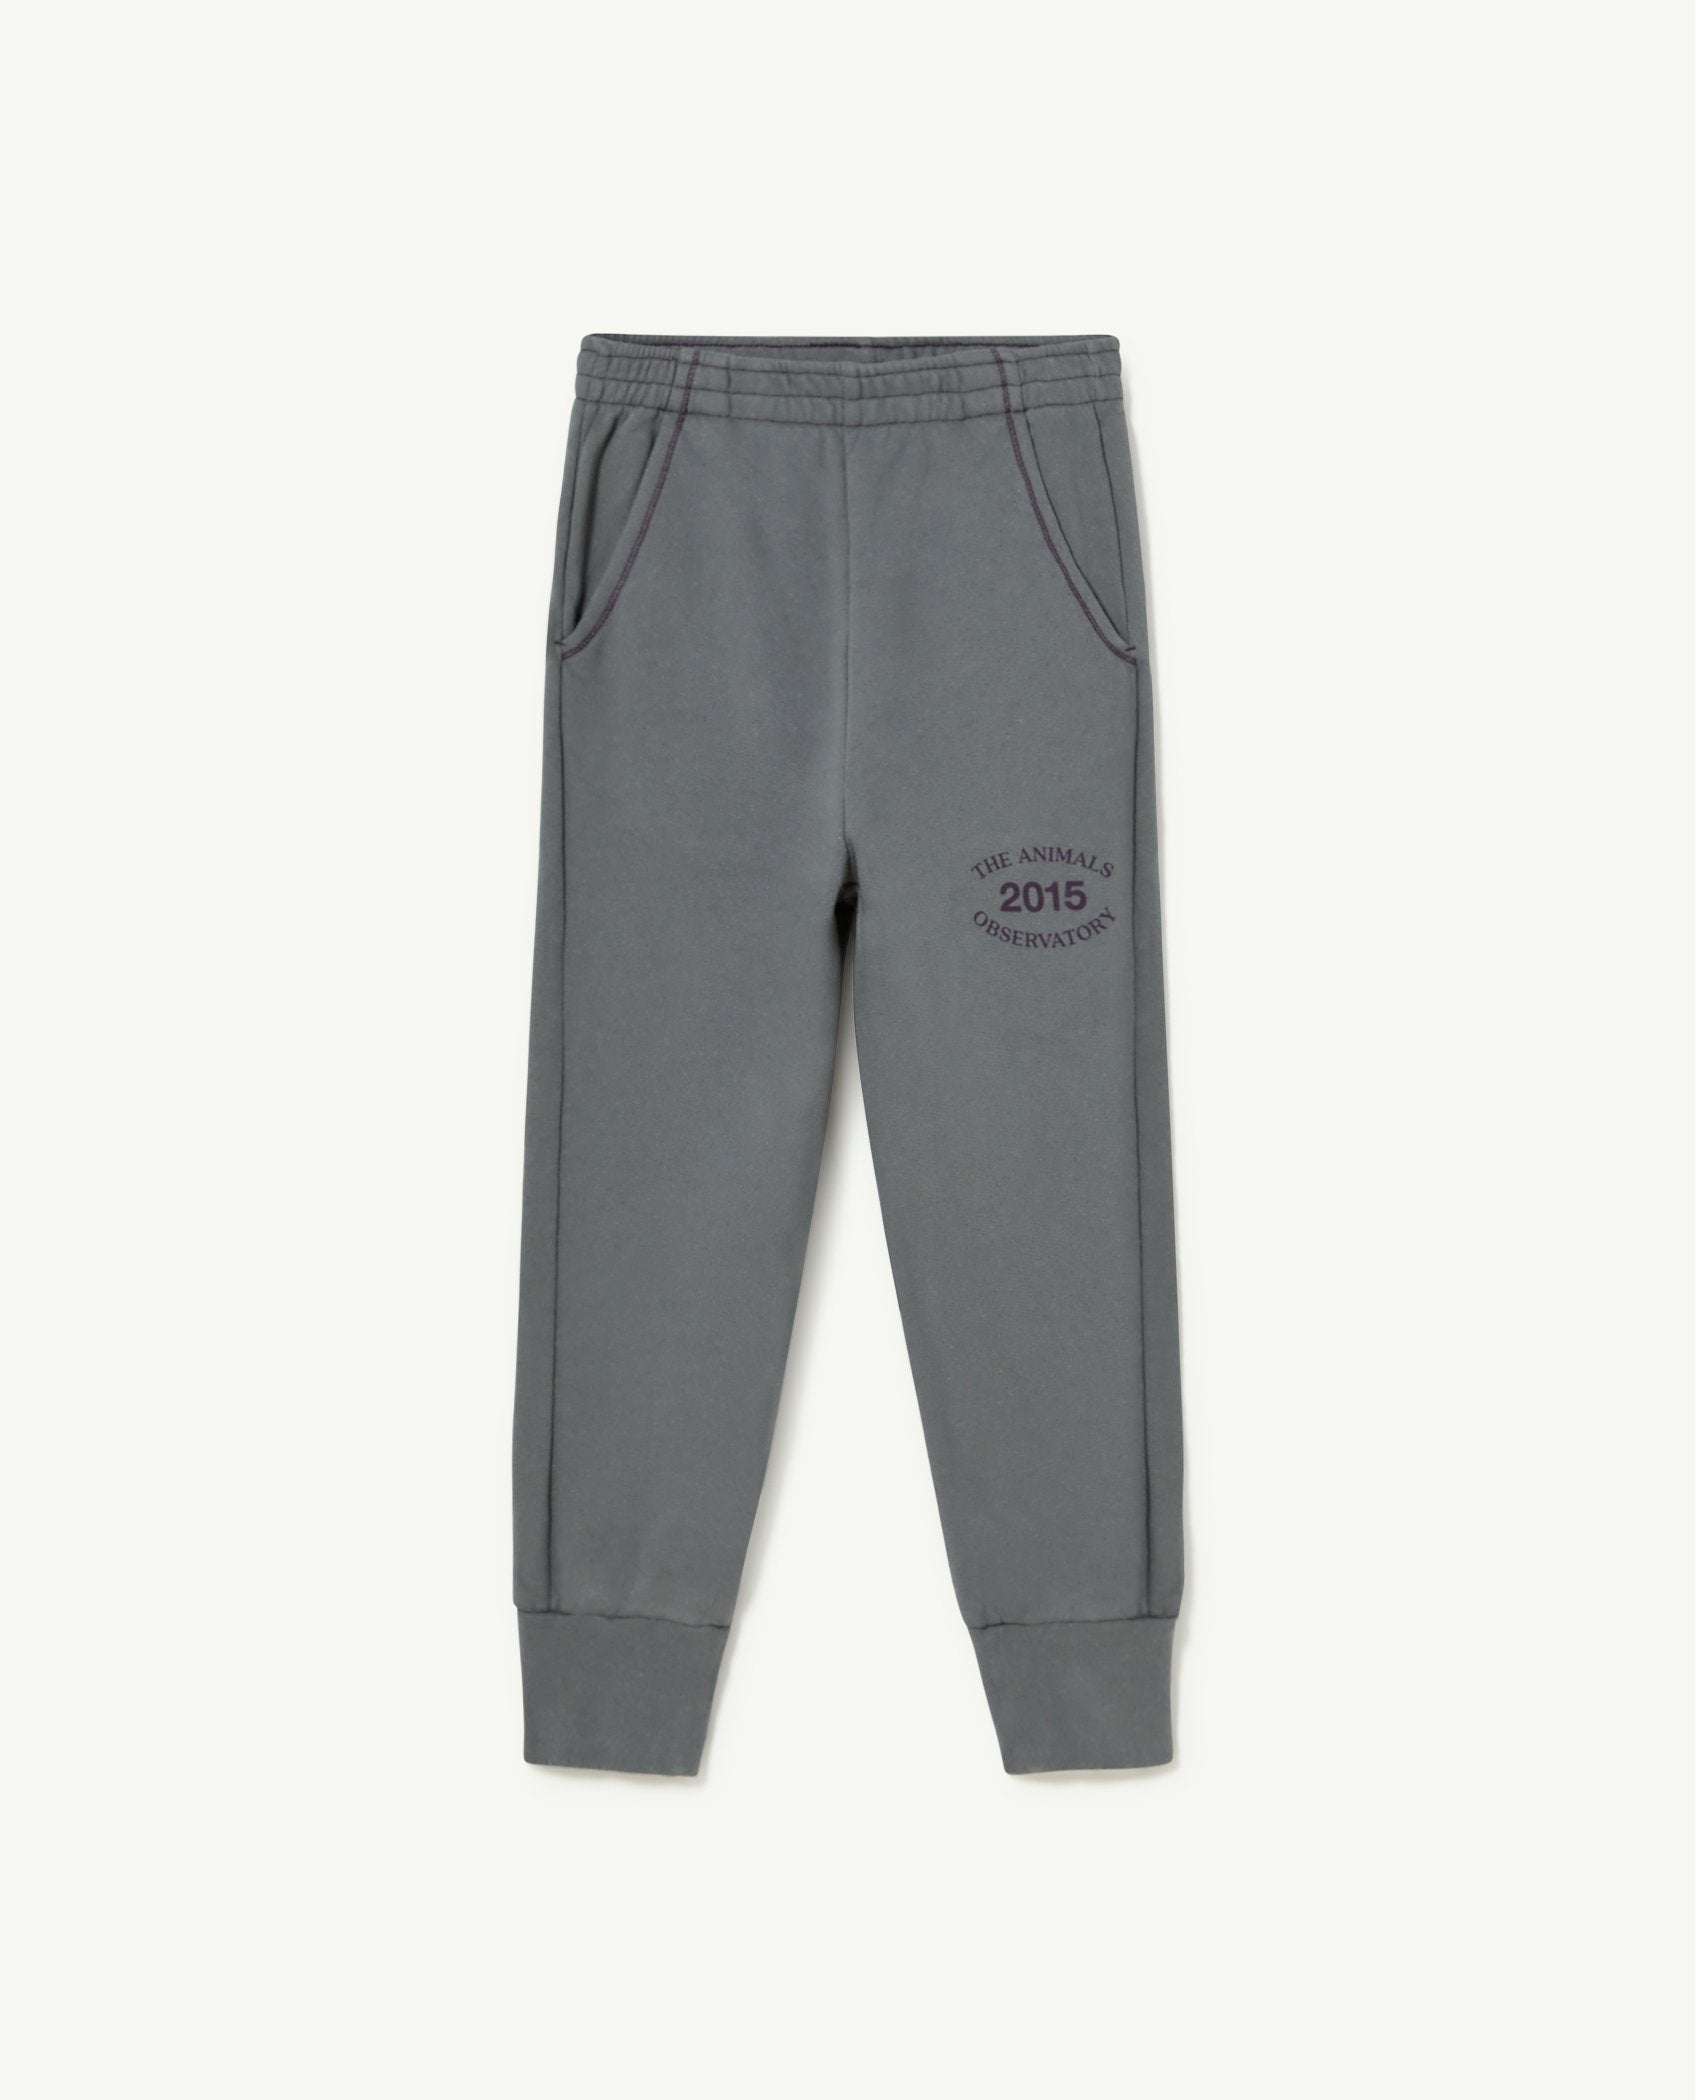 Grey Panther Kids Pants PRODUCT FRONT